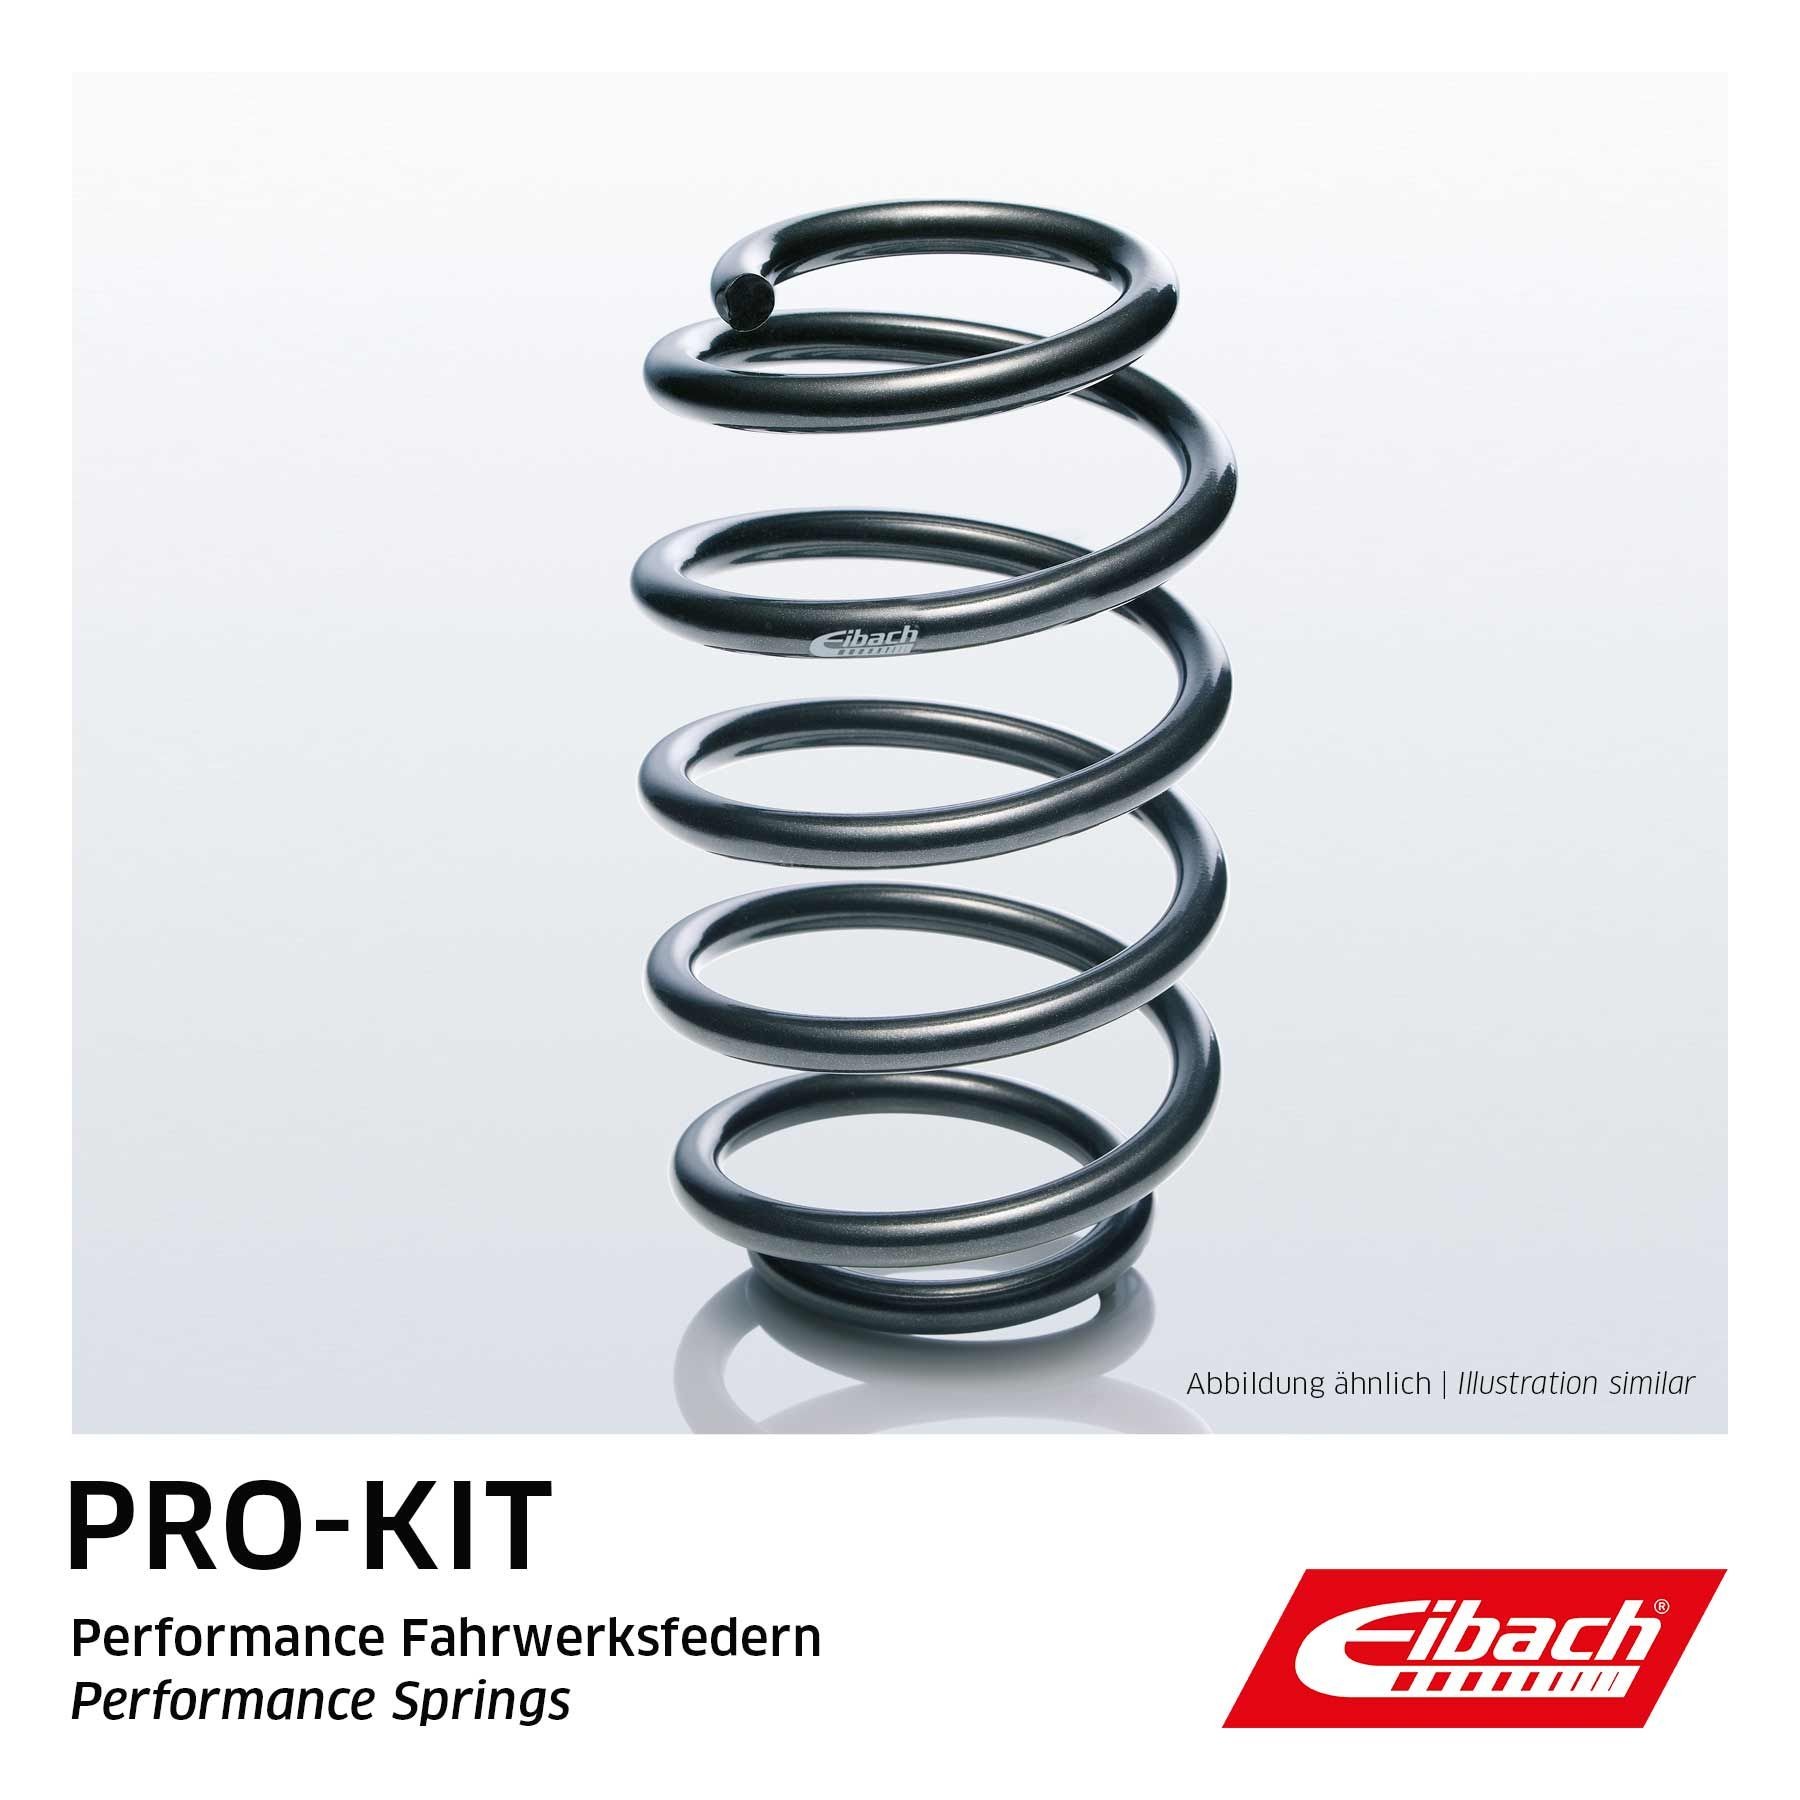 117001401 EIBACH Single Spring Pro-Kit Rear Axle, Coil Spring, for vehicles with sports suspension Length: 330mm Spring F11-70-014-01-HA buy